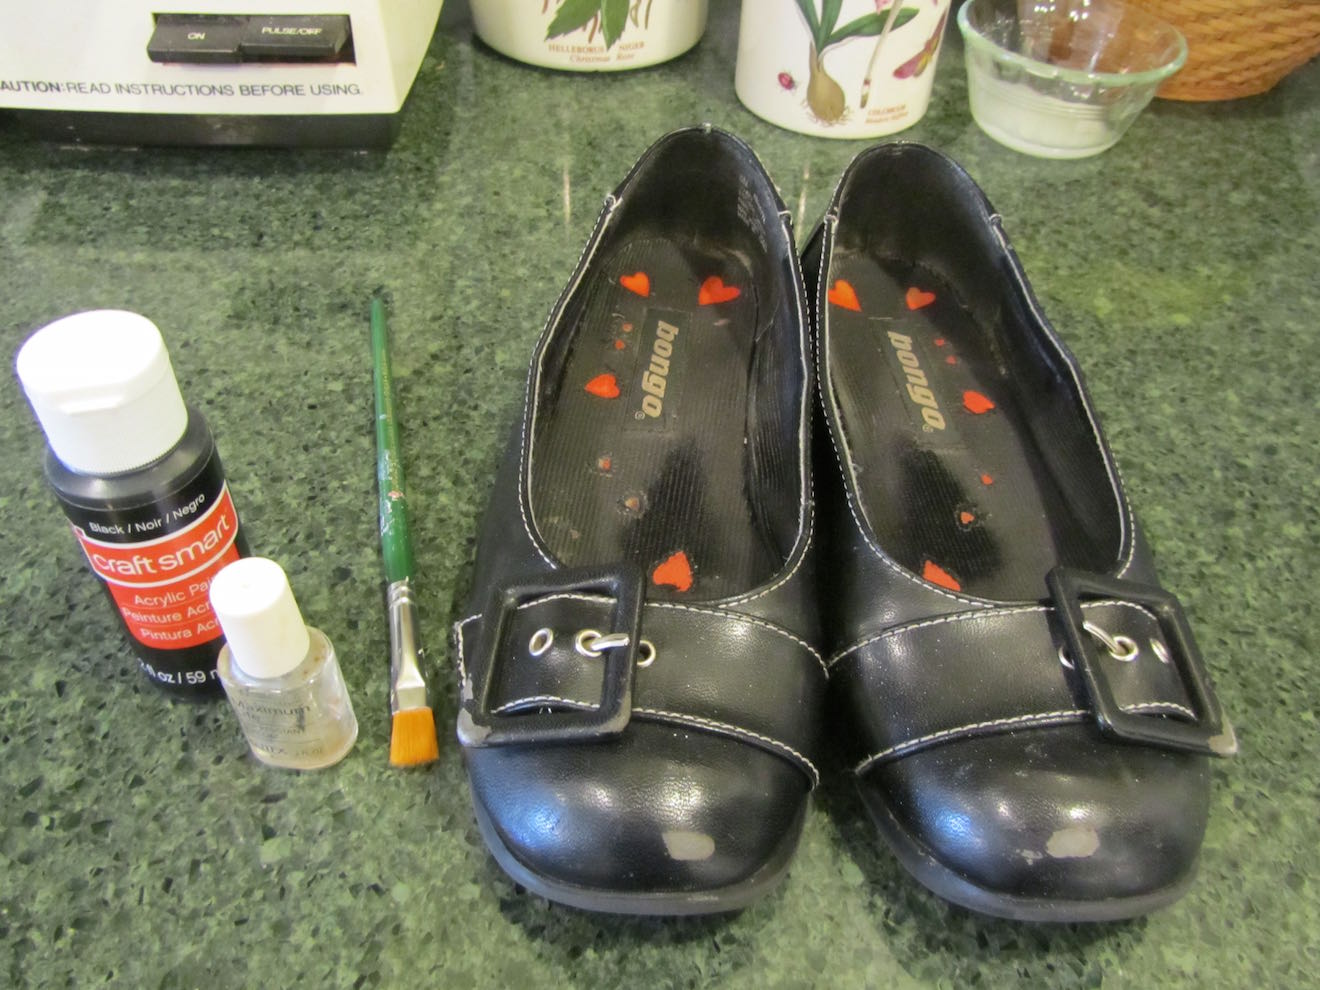 creative savv: Repairing damaged surface of faux leather shoes